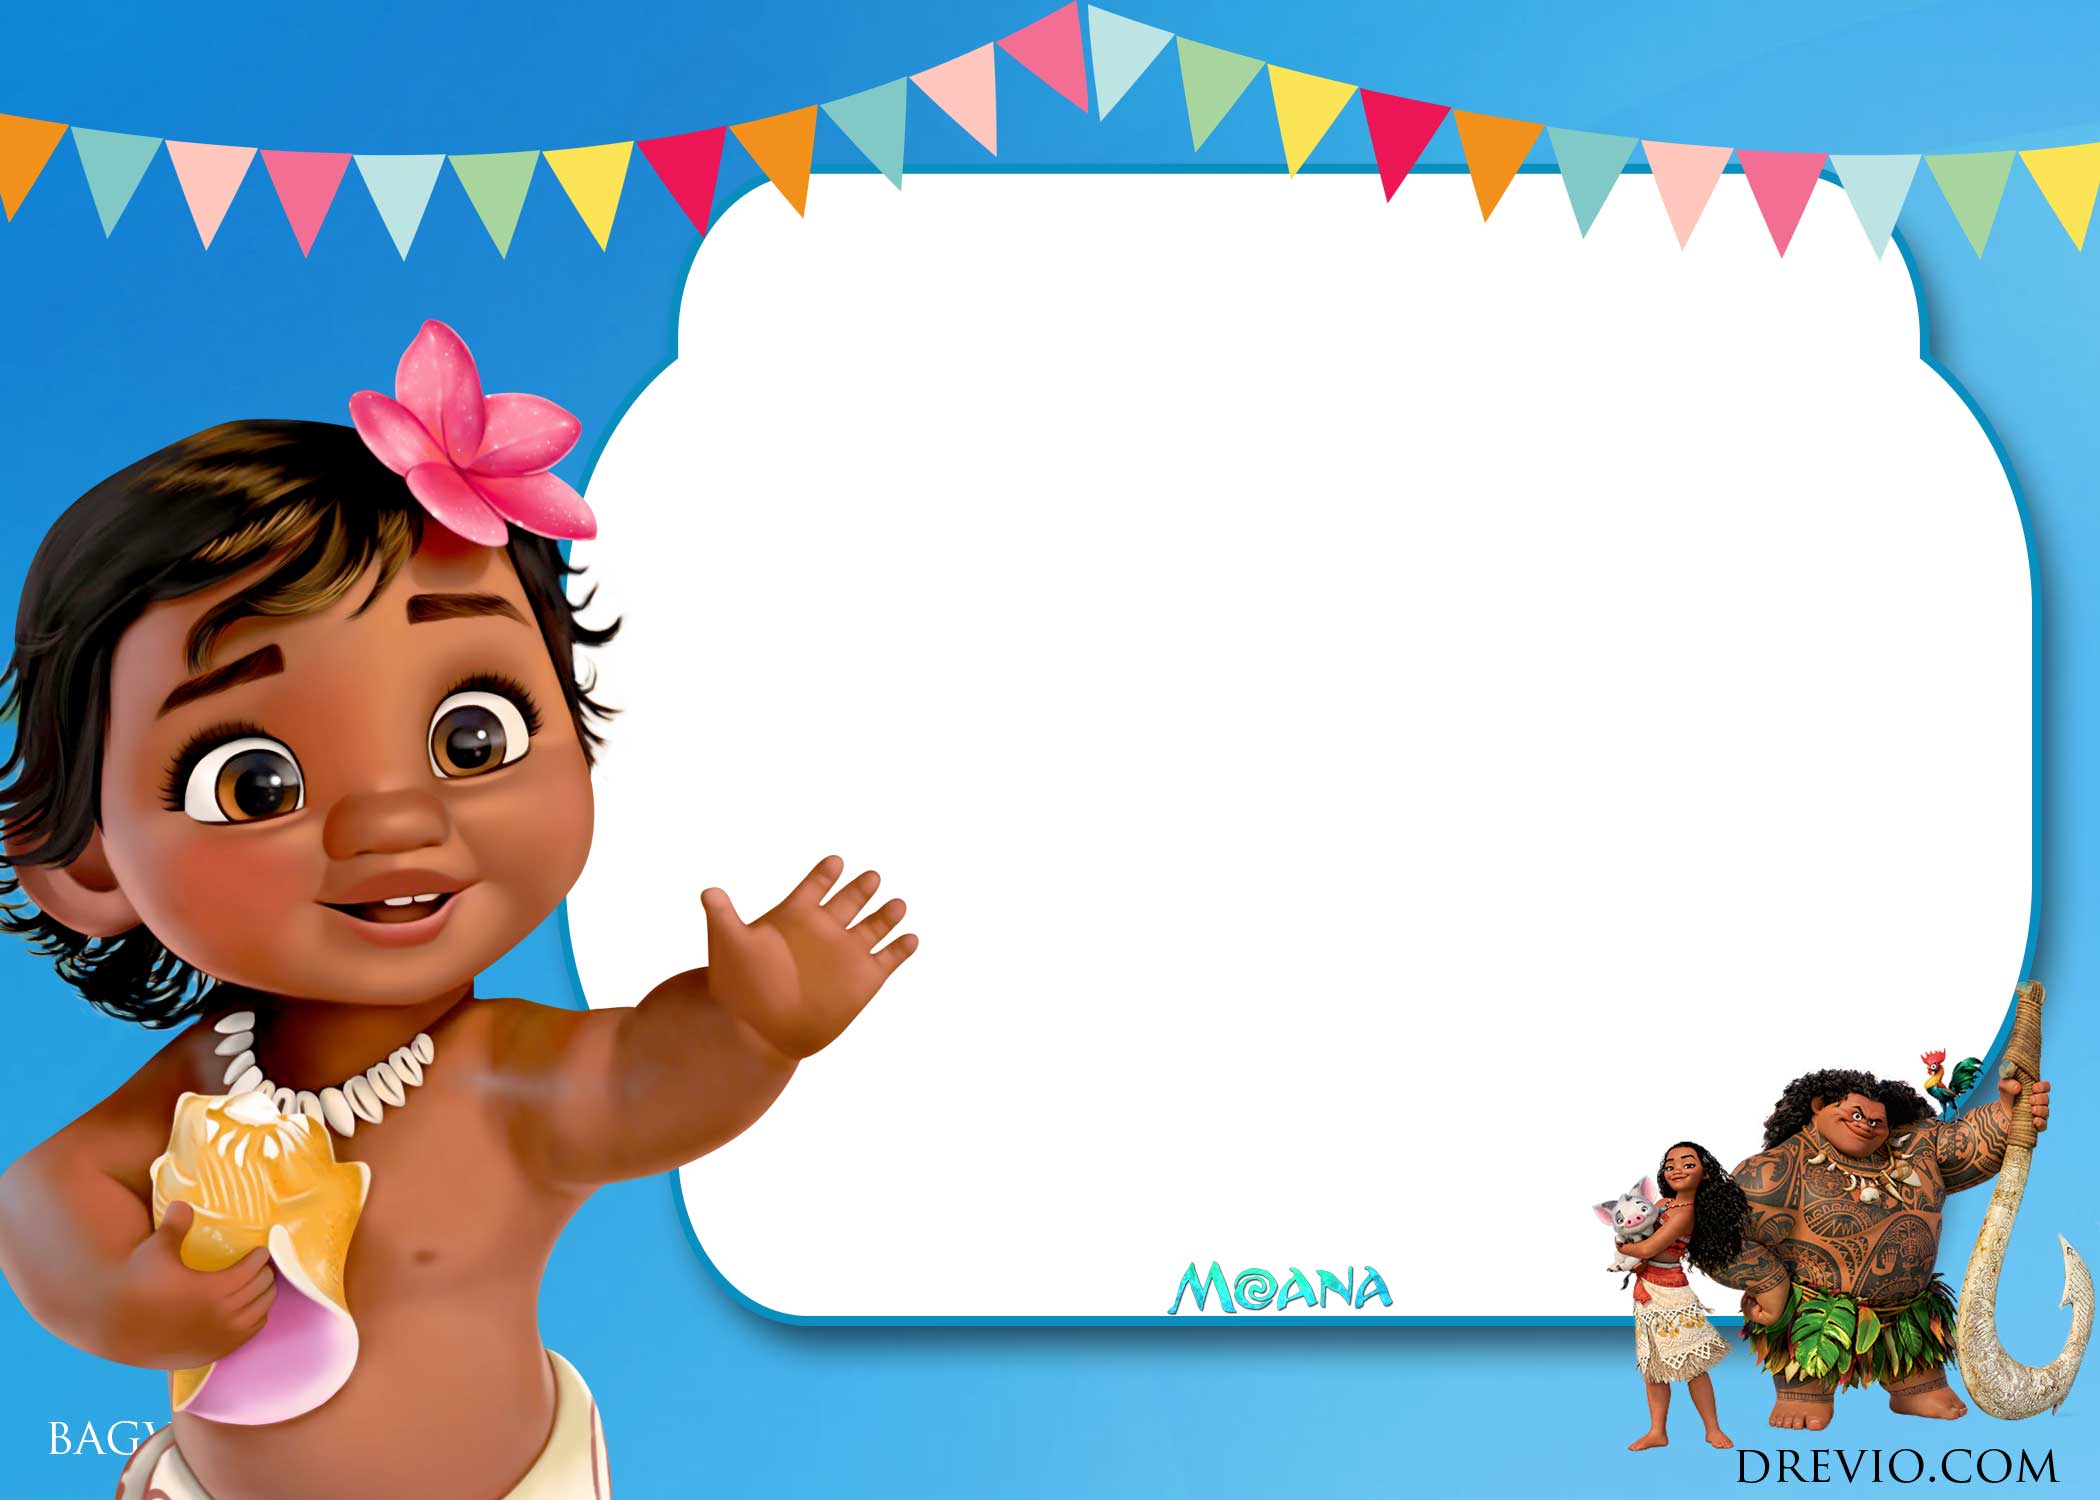 Baby Moana Image. can t miss bargains on baby moana costume baby